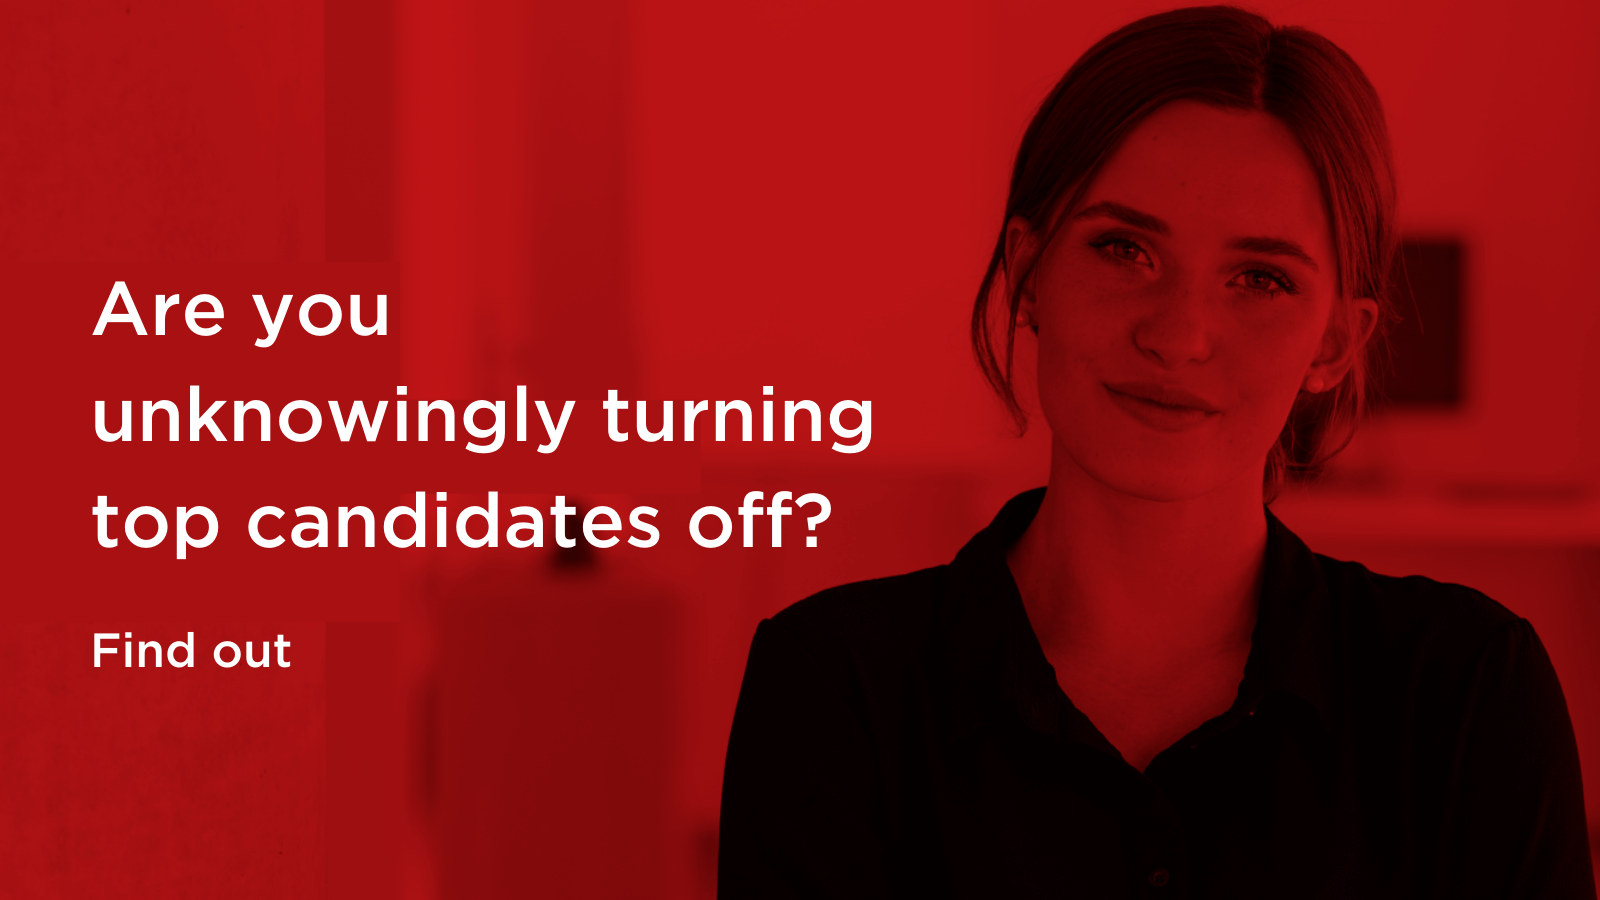 Are you unknowingly turning candidates off?